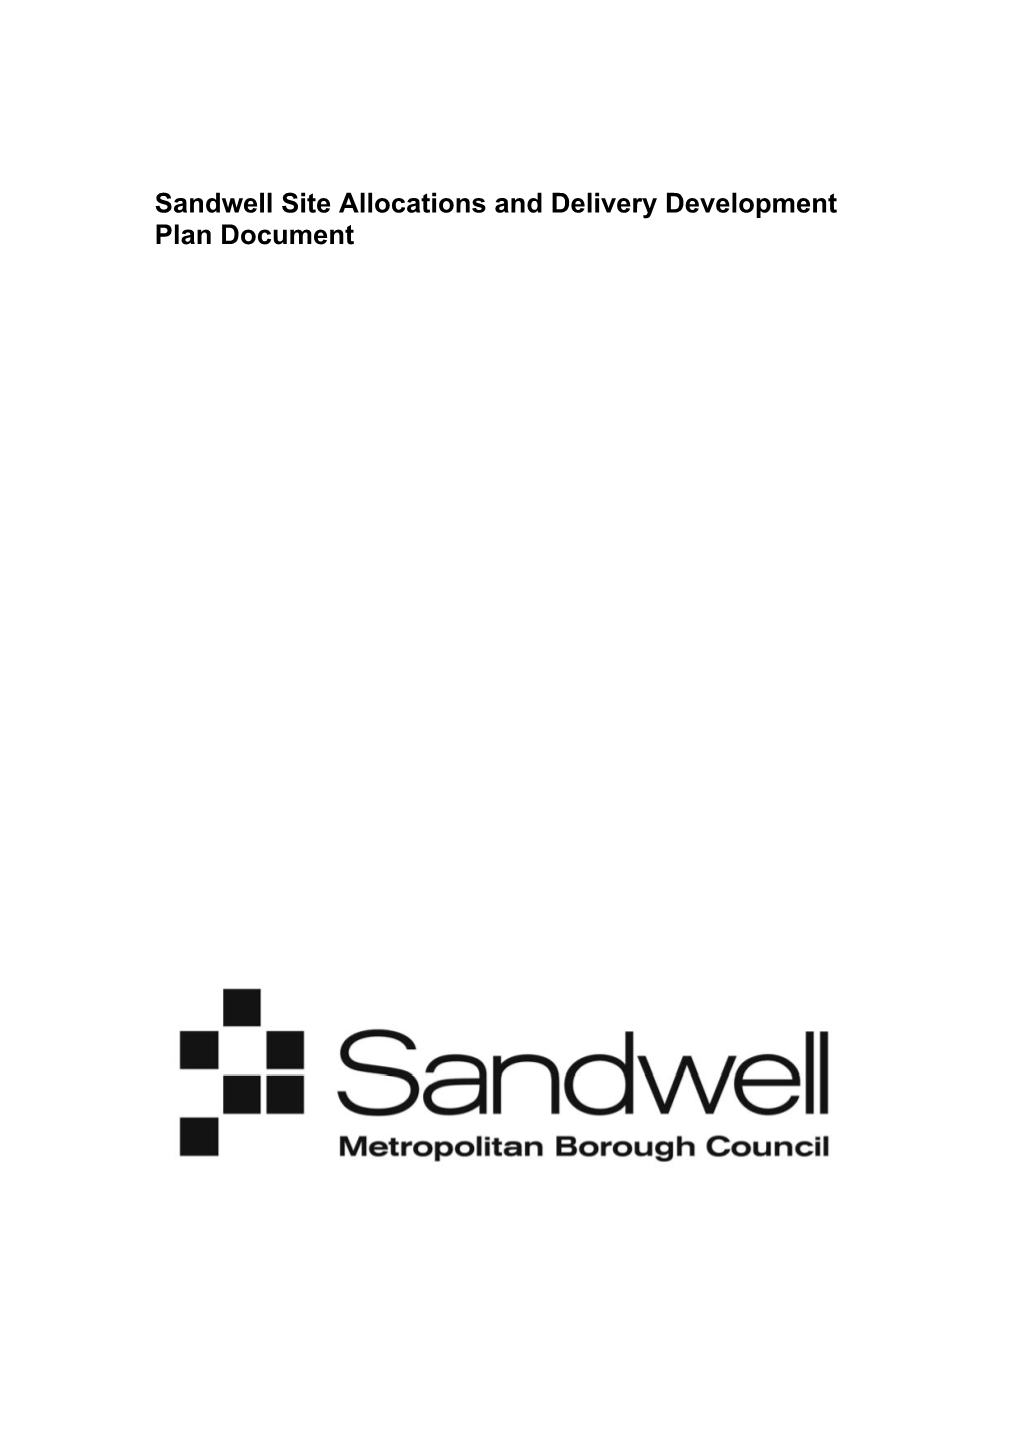 Sandwell Site Allocations and Delivery Development Plan Document